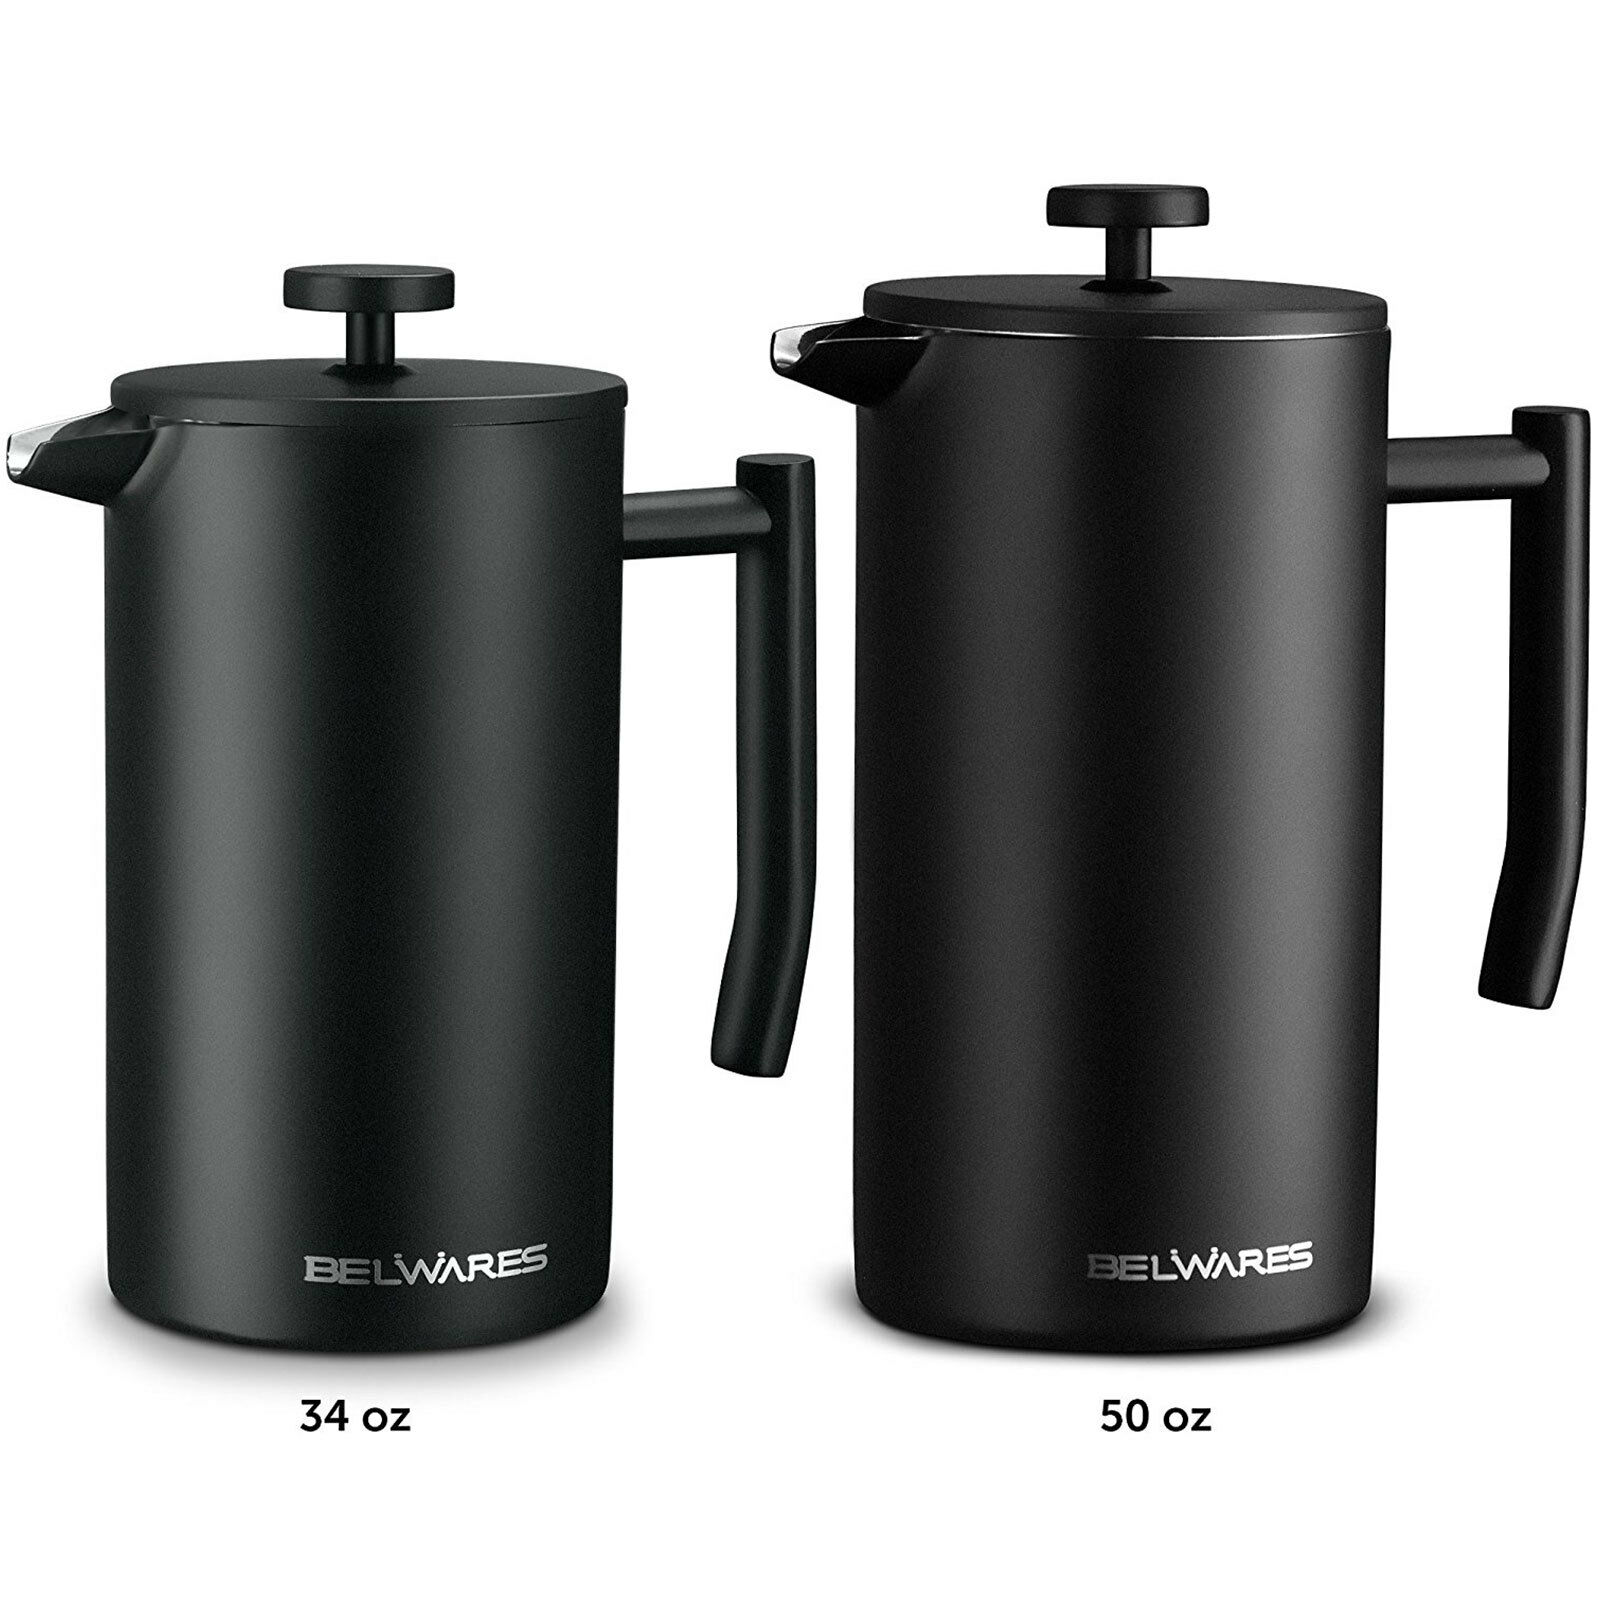 Belwares Stainless Steel Large French Press Coffee Maker With Extra Filters